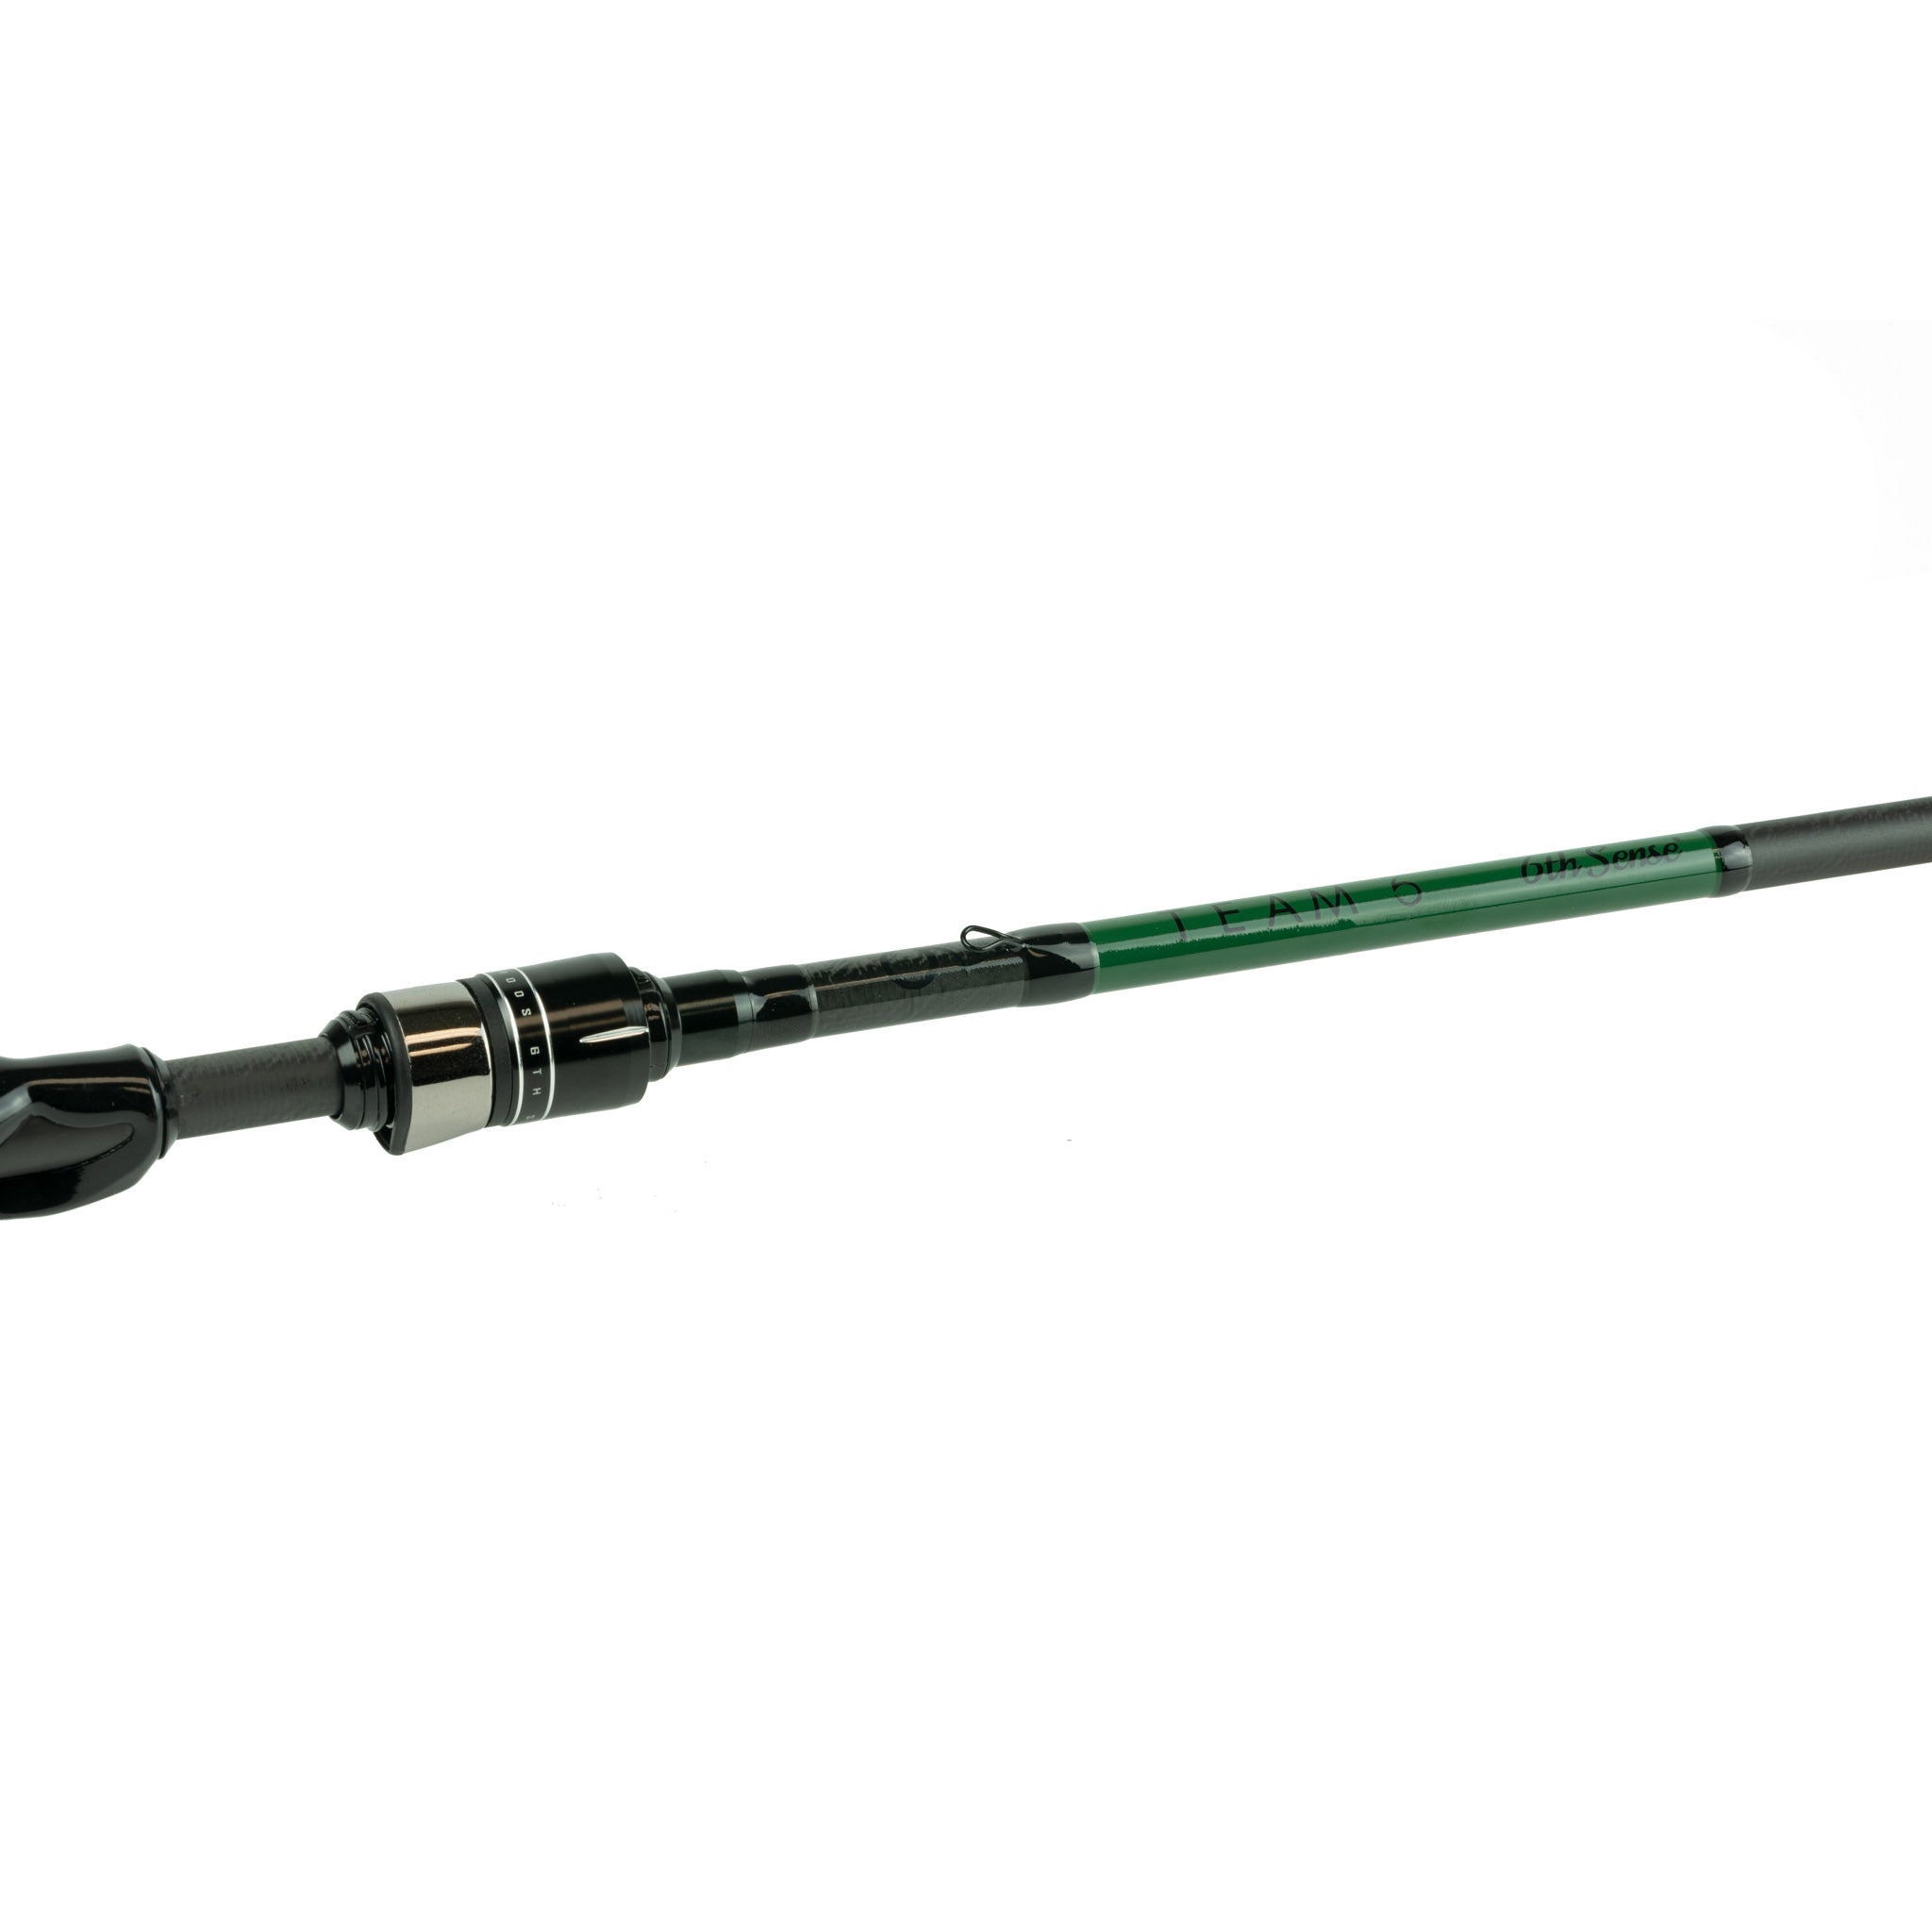 Squad Inshore Spinning Rod - Saltwater Rod